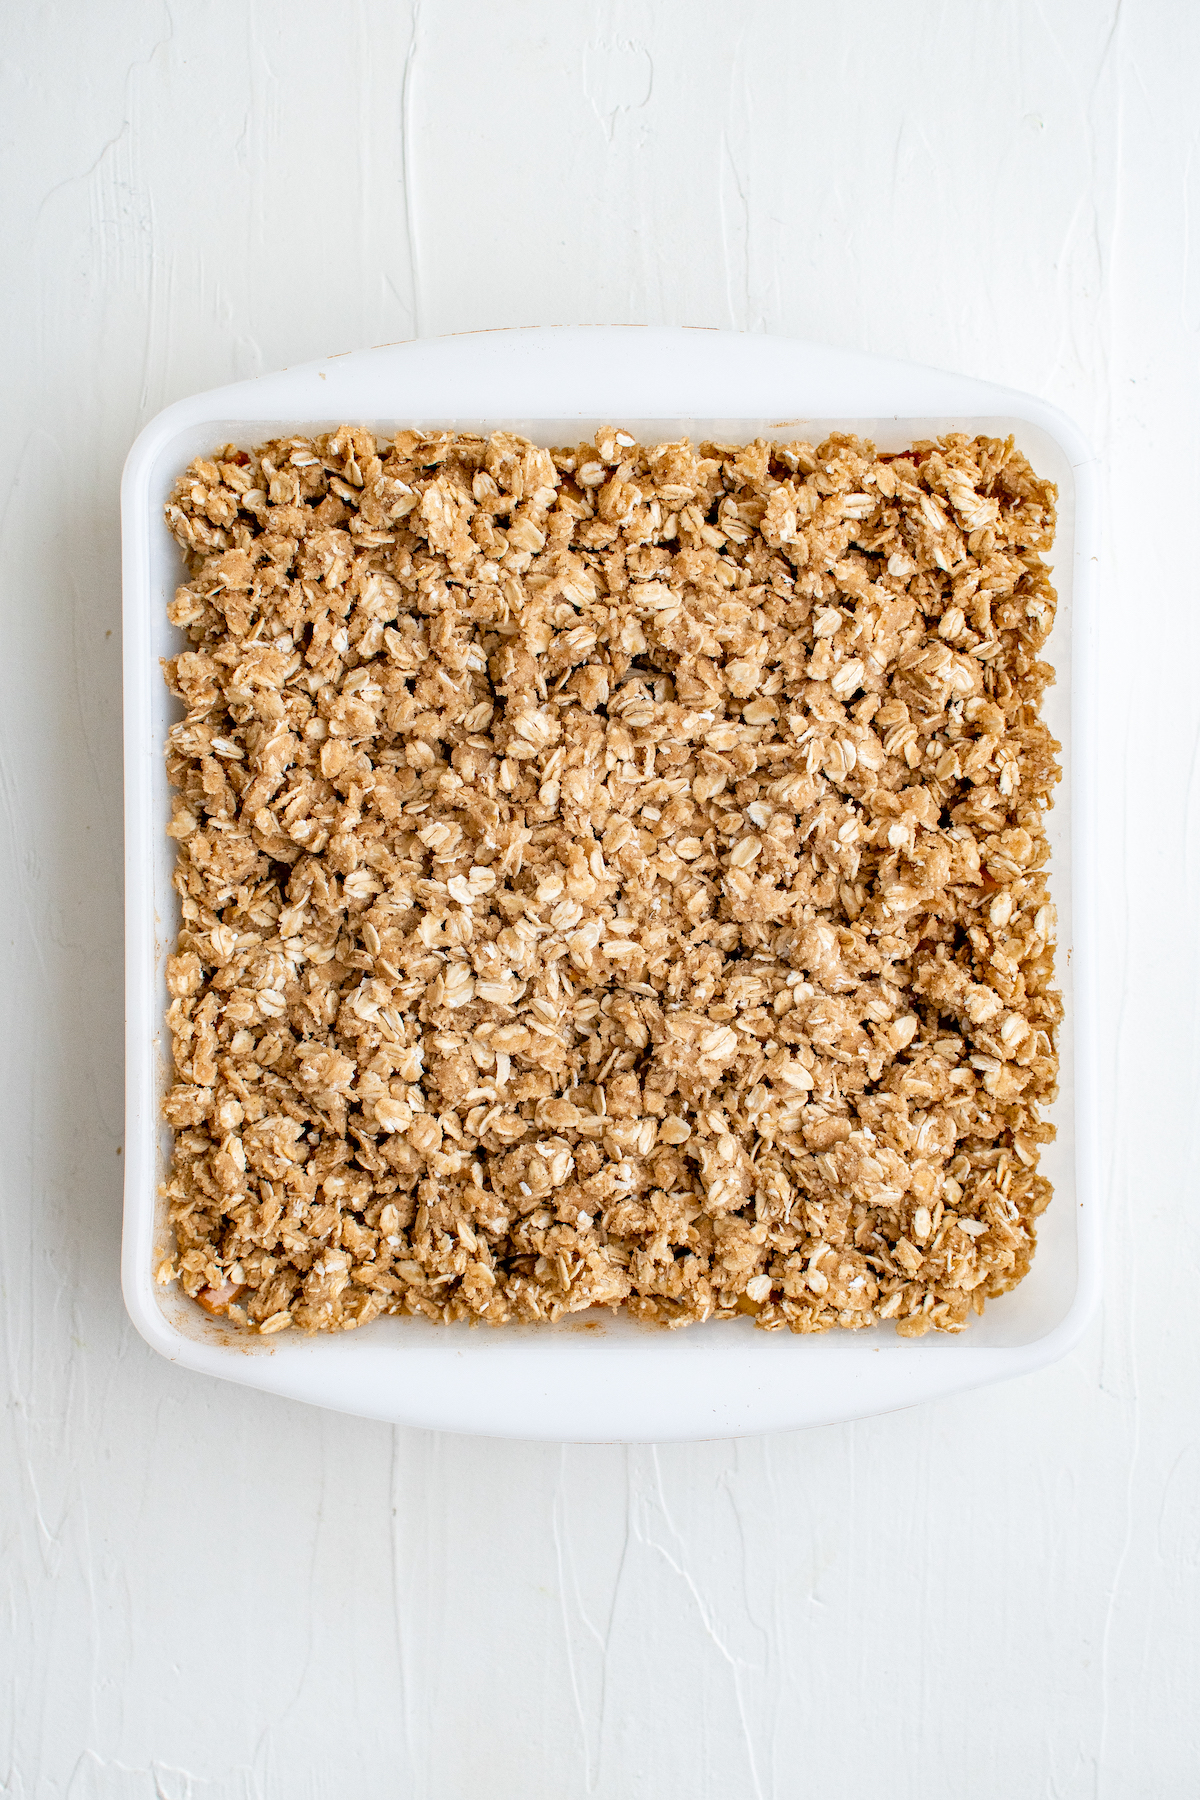 An unbaked peach crisp in a square baking dish.